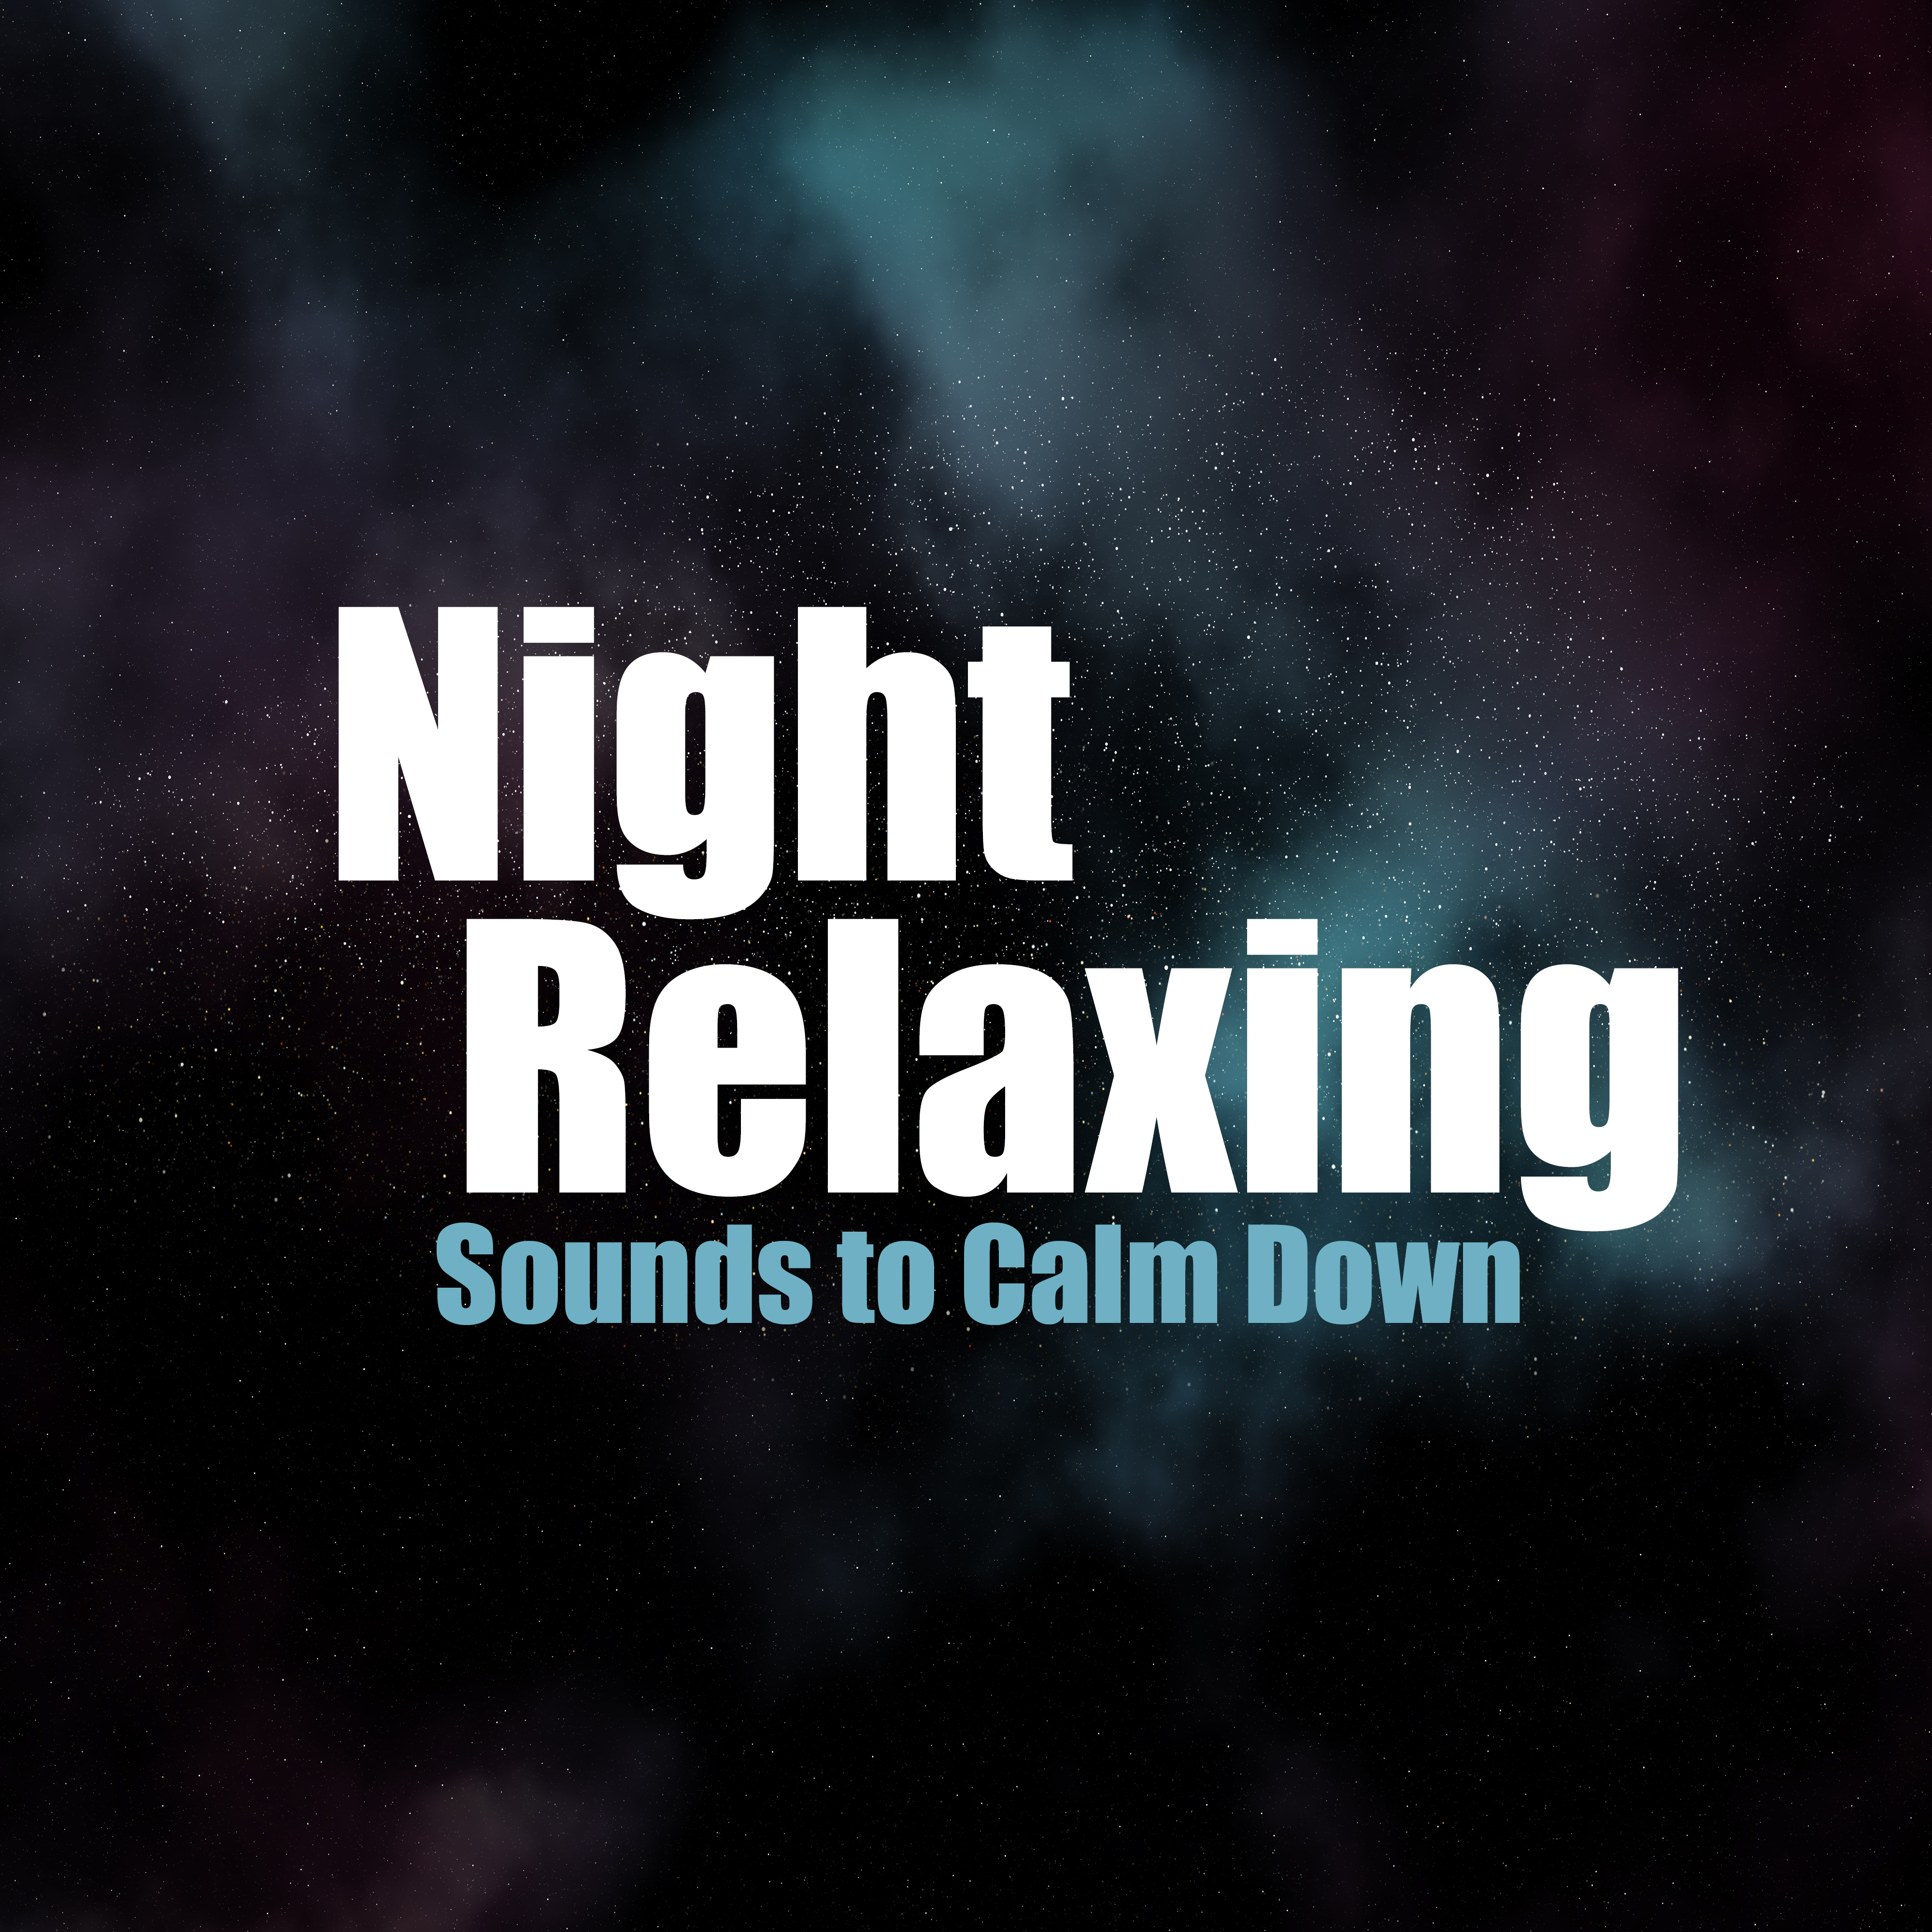 Night Relaxing Sounds to Calm Down